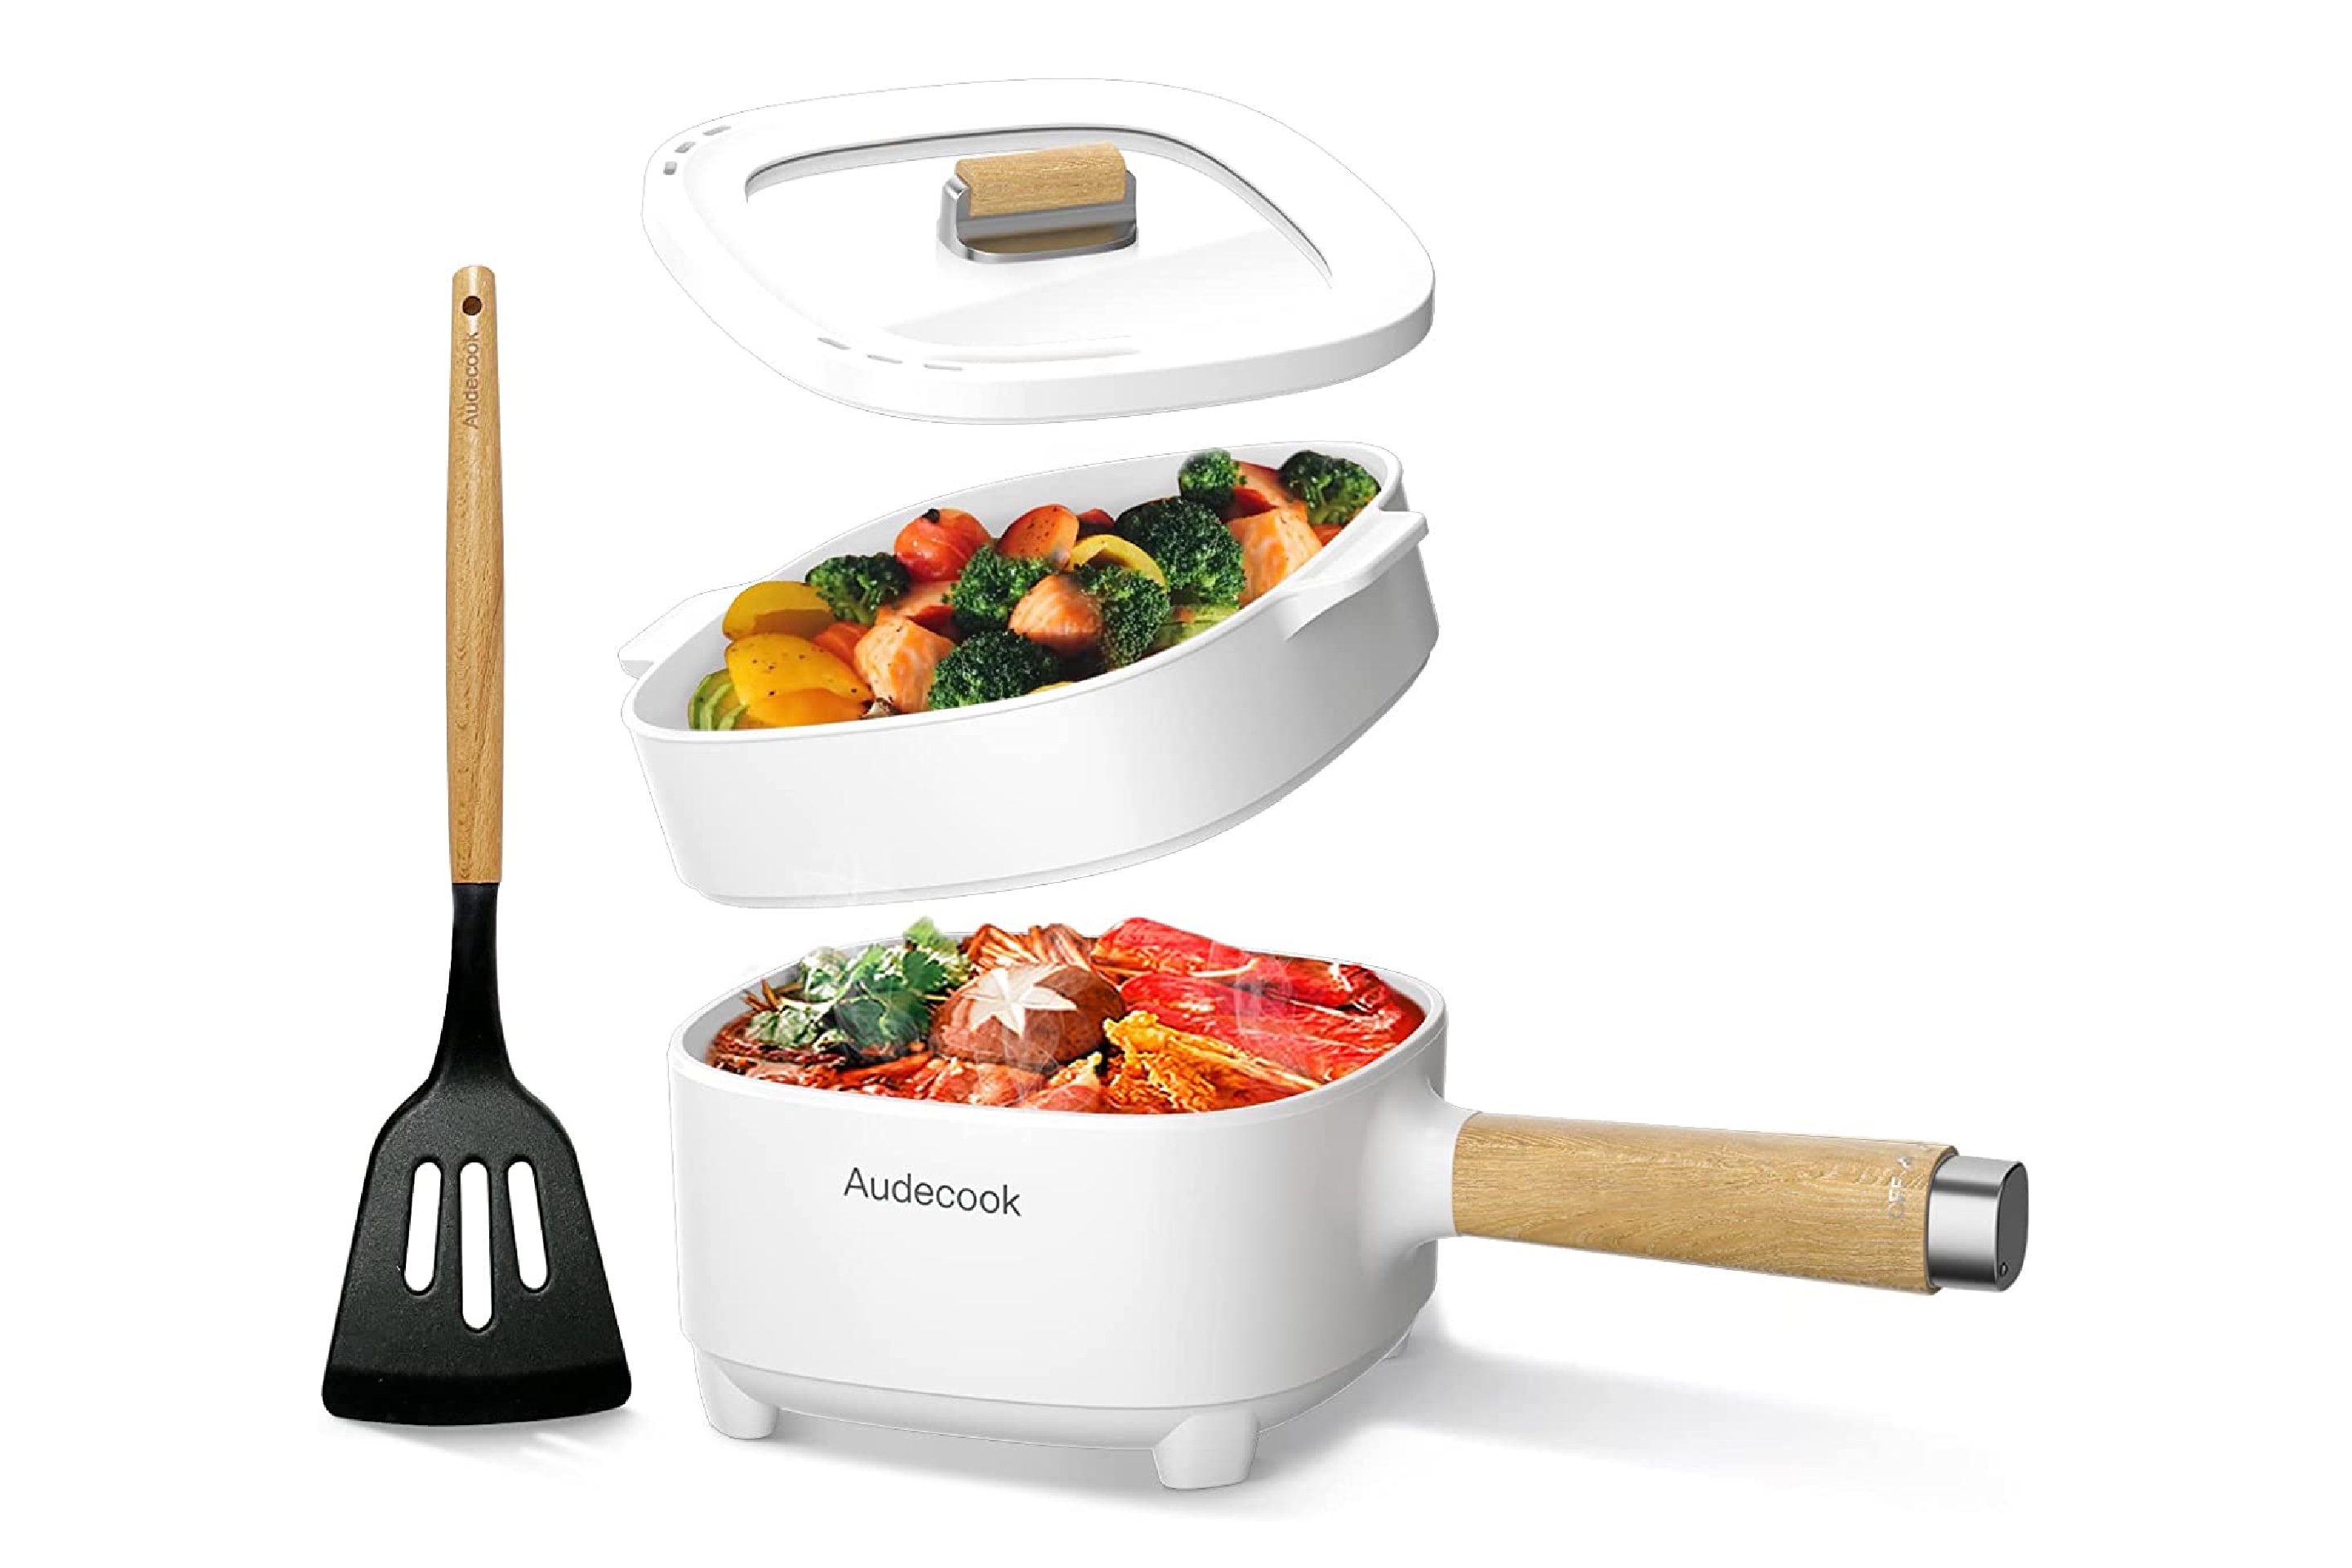 Audecook Electric Hot Pot with Steamer, Frying Pan, Cooker